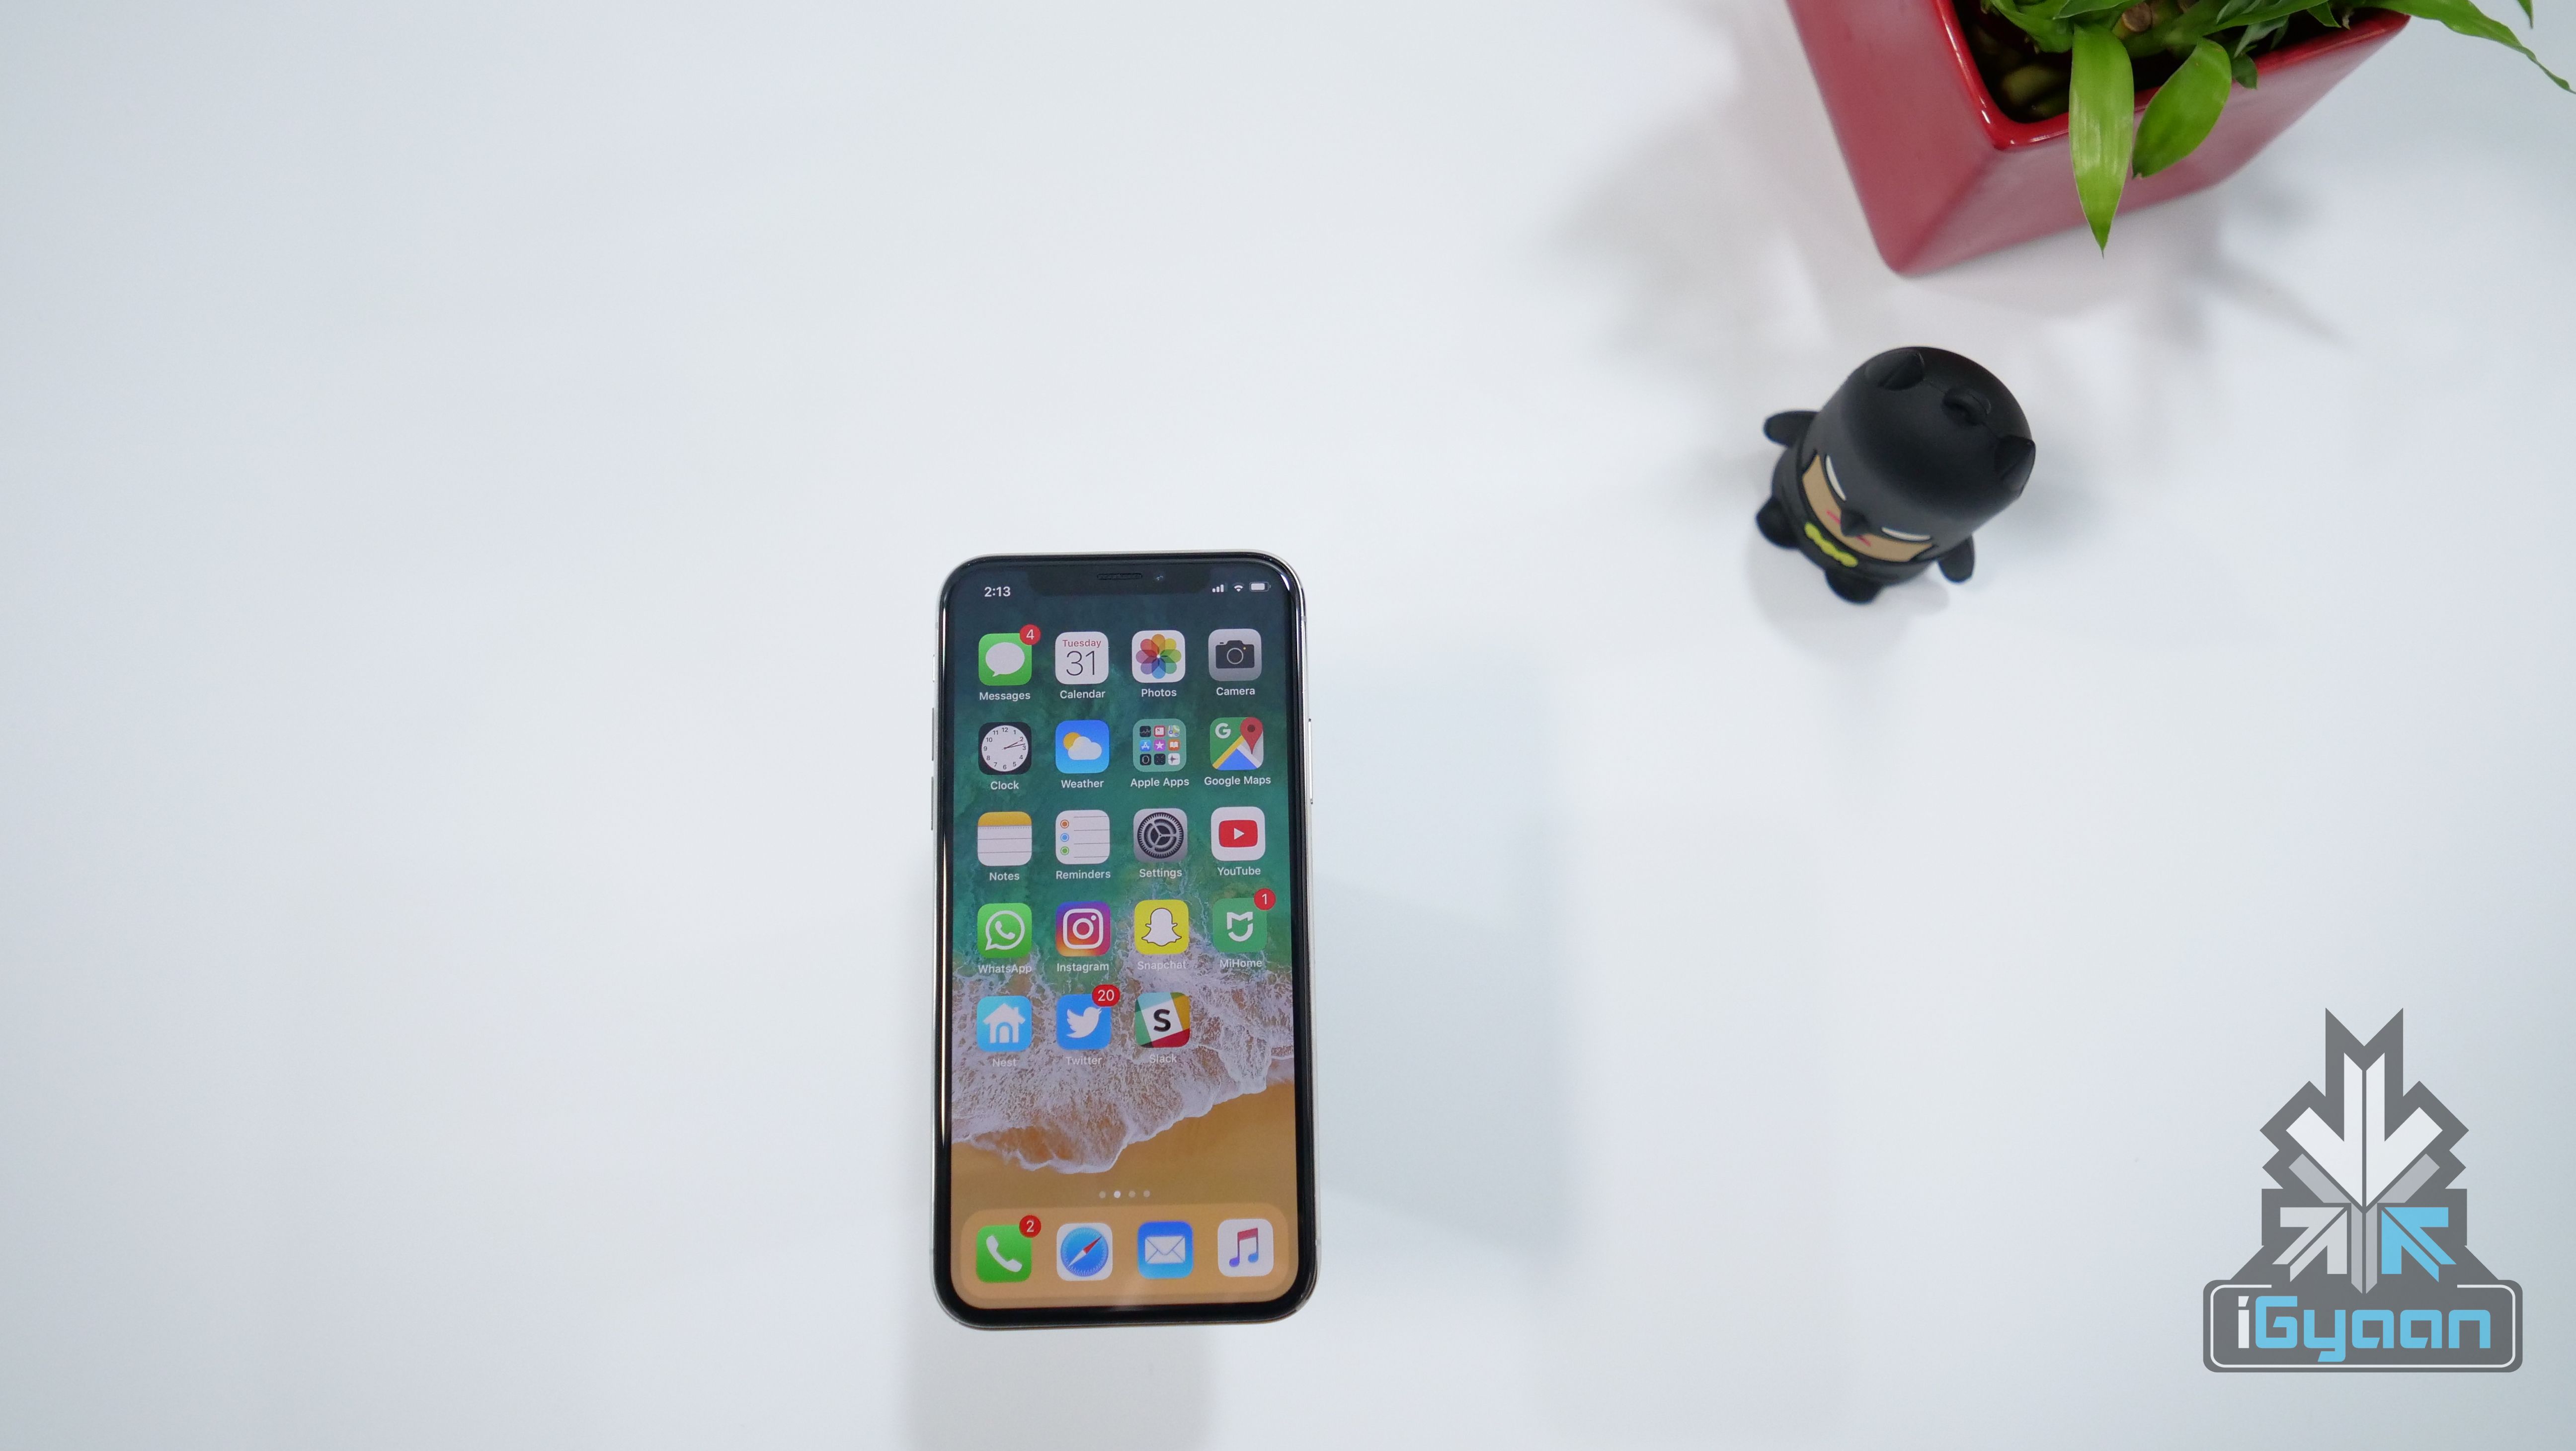 Apple may discontinue iPhone X around mid